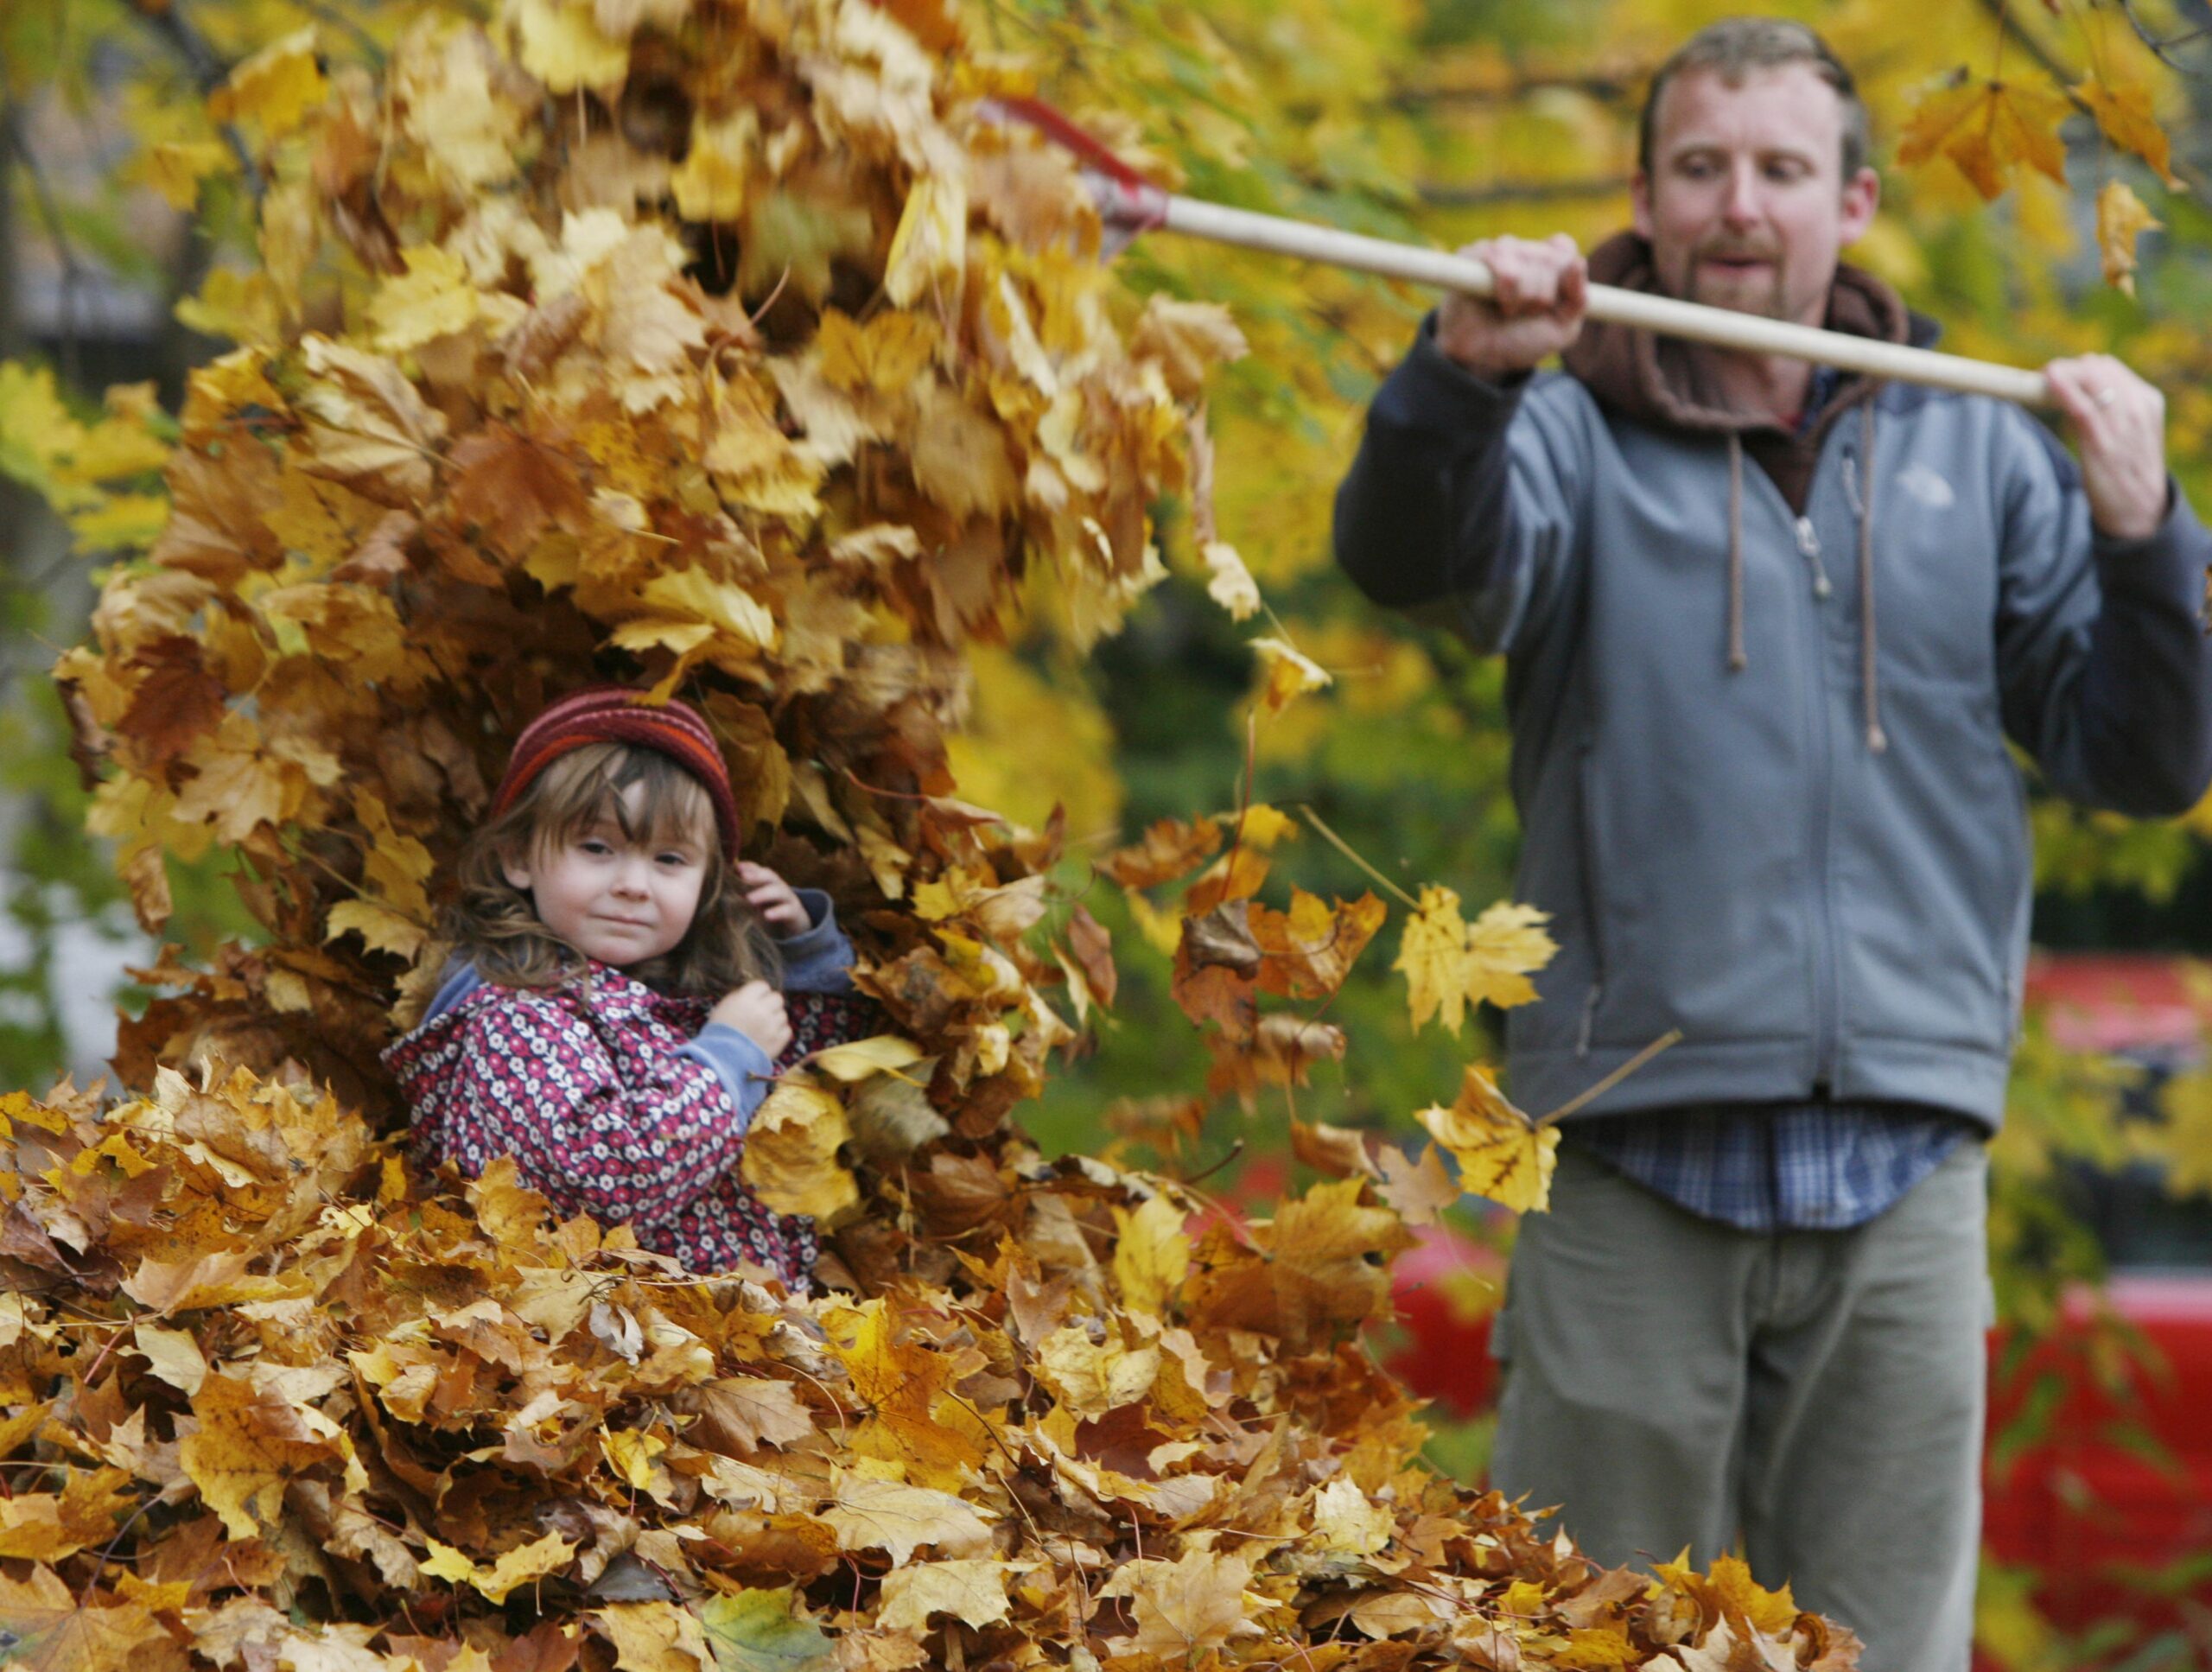 Child playing in a leaf pile with her dad